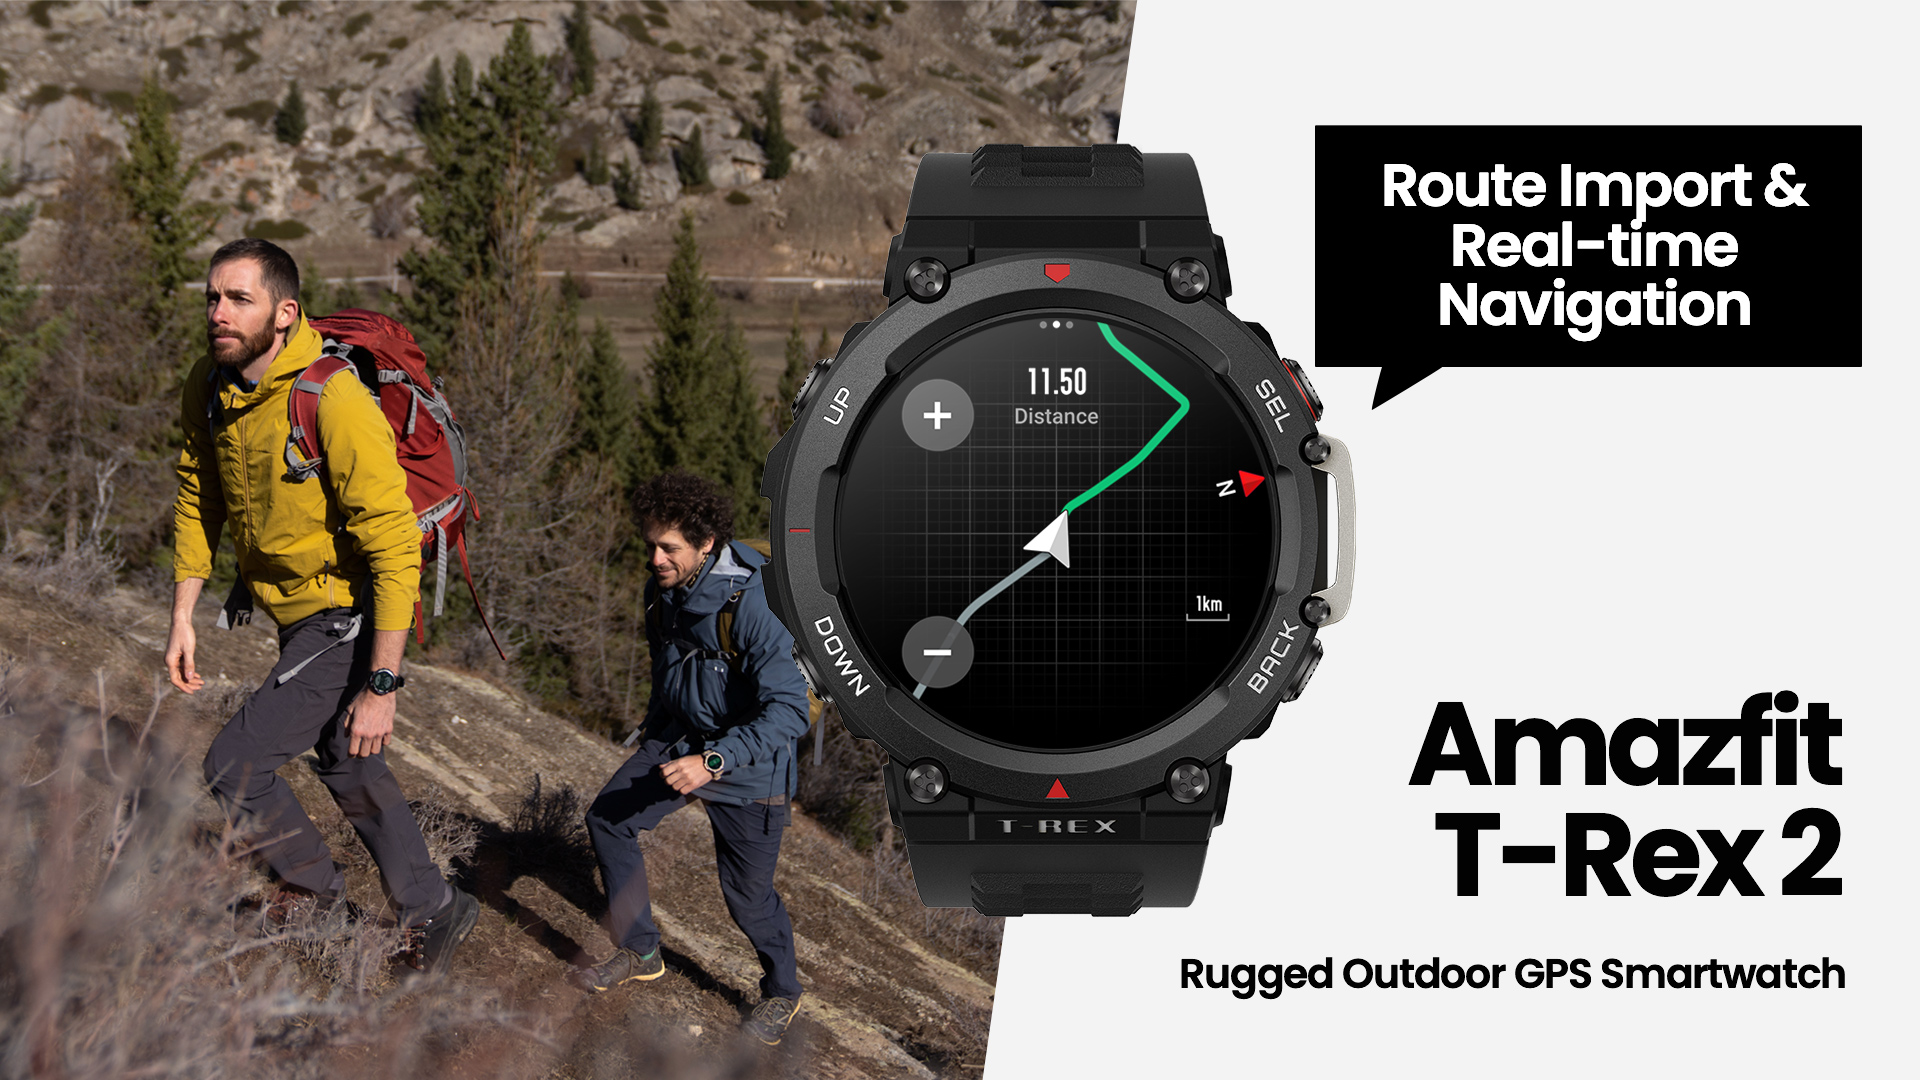 Amazfit TRex 2 review: a rugged adventure watch, at an excellent